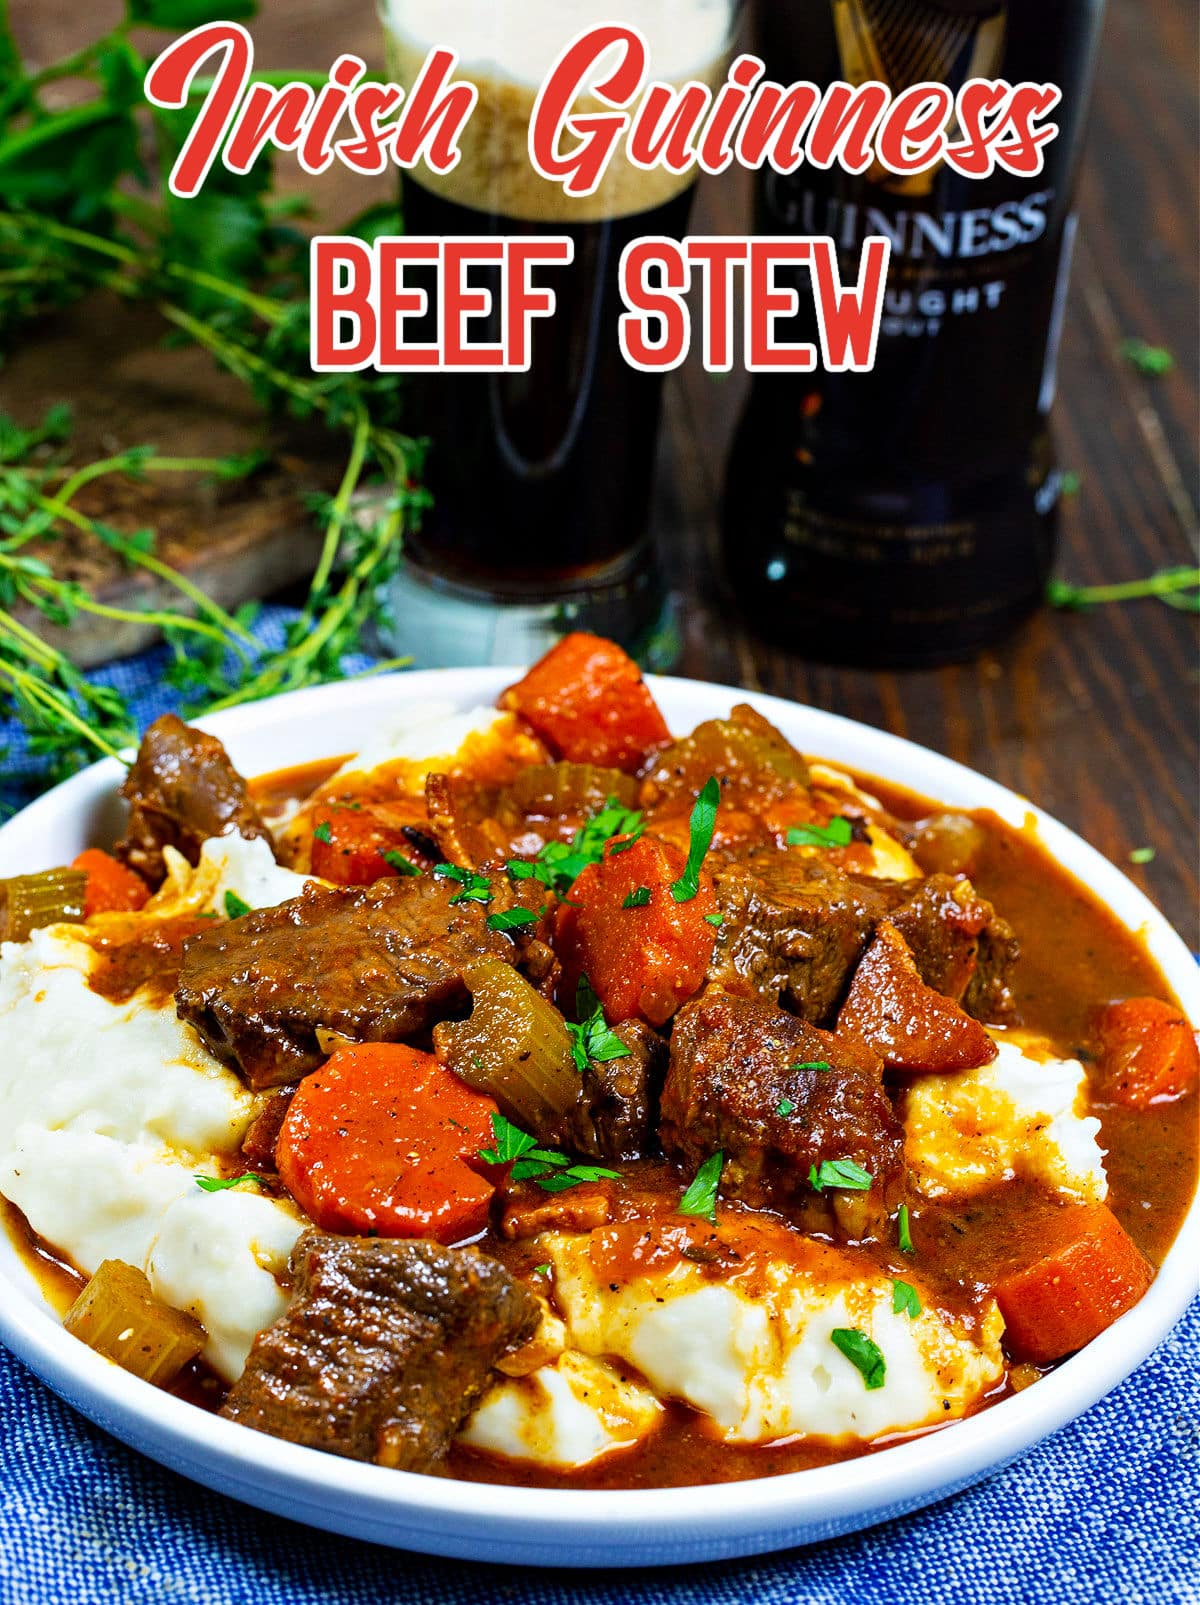 Beef Stew on a plate over mashed potatoes.